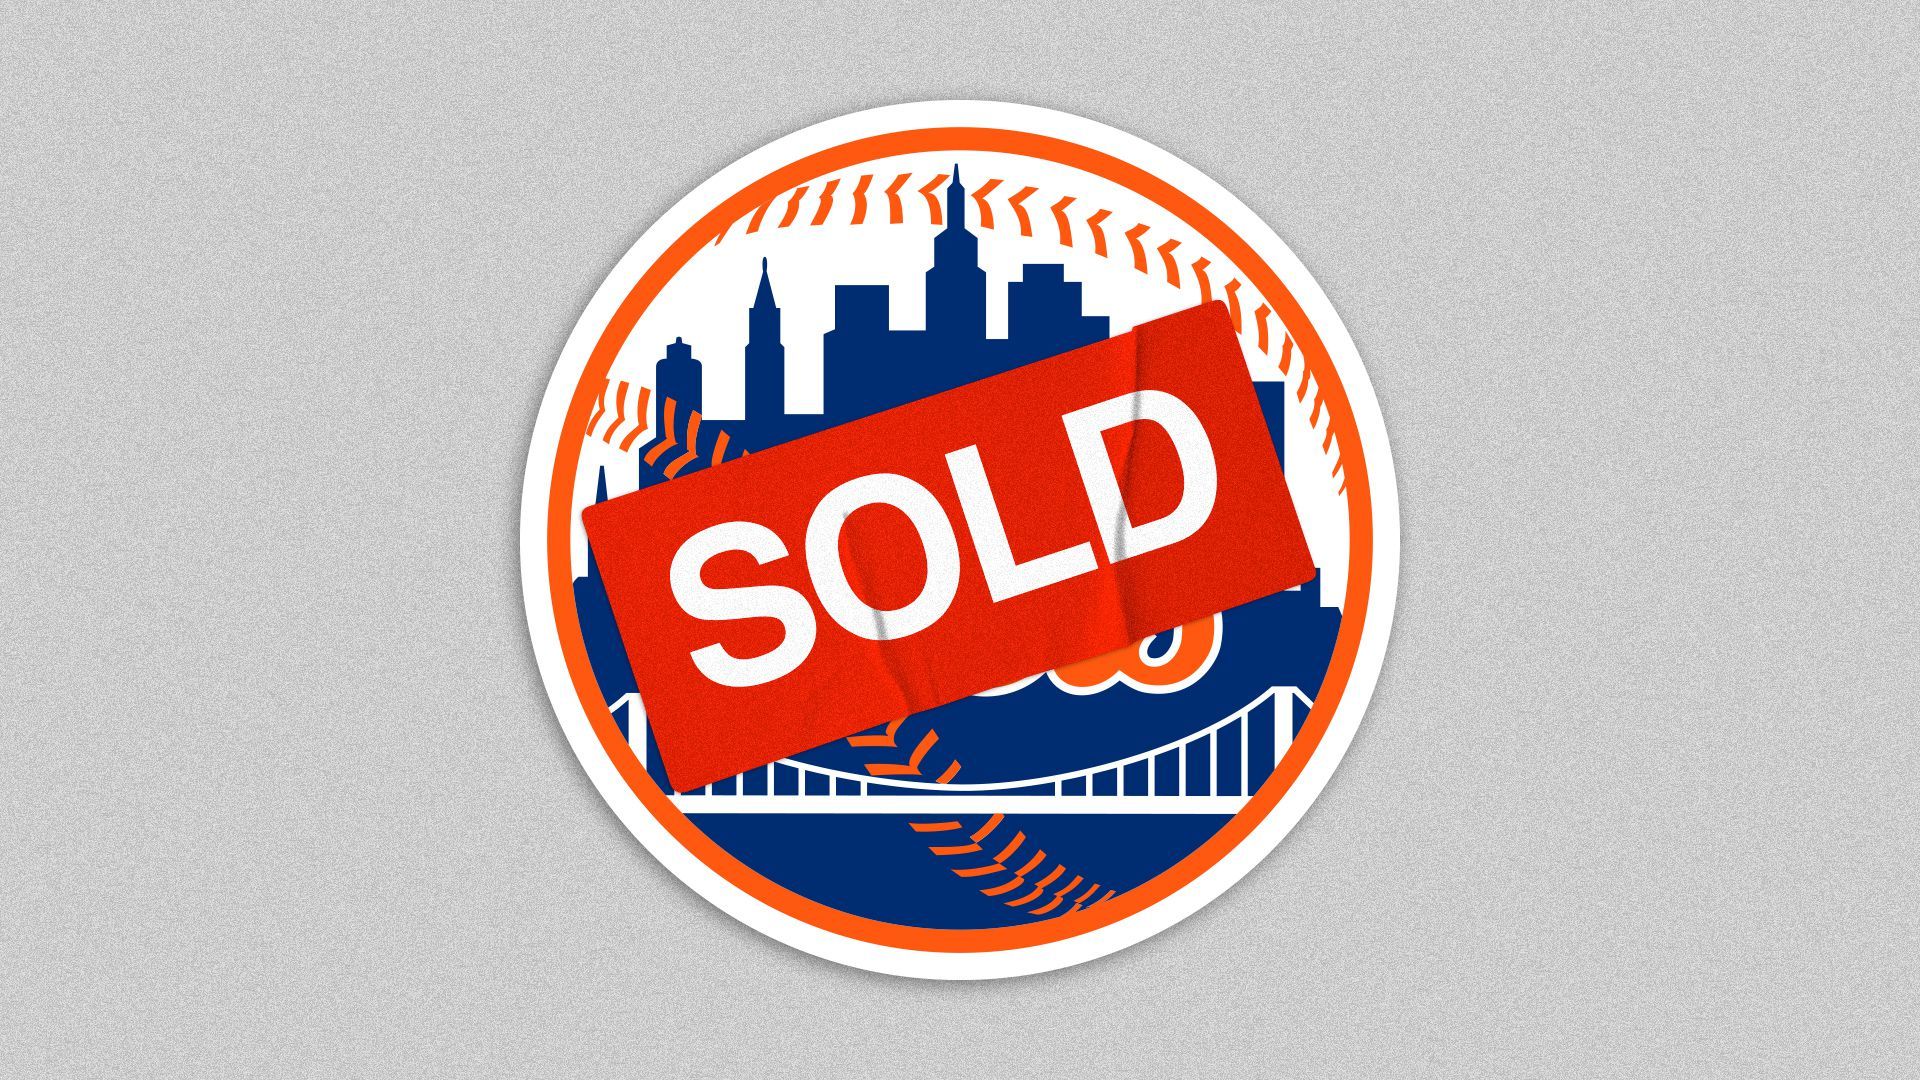 Illustration of the Mets logo with a sold sticker on top